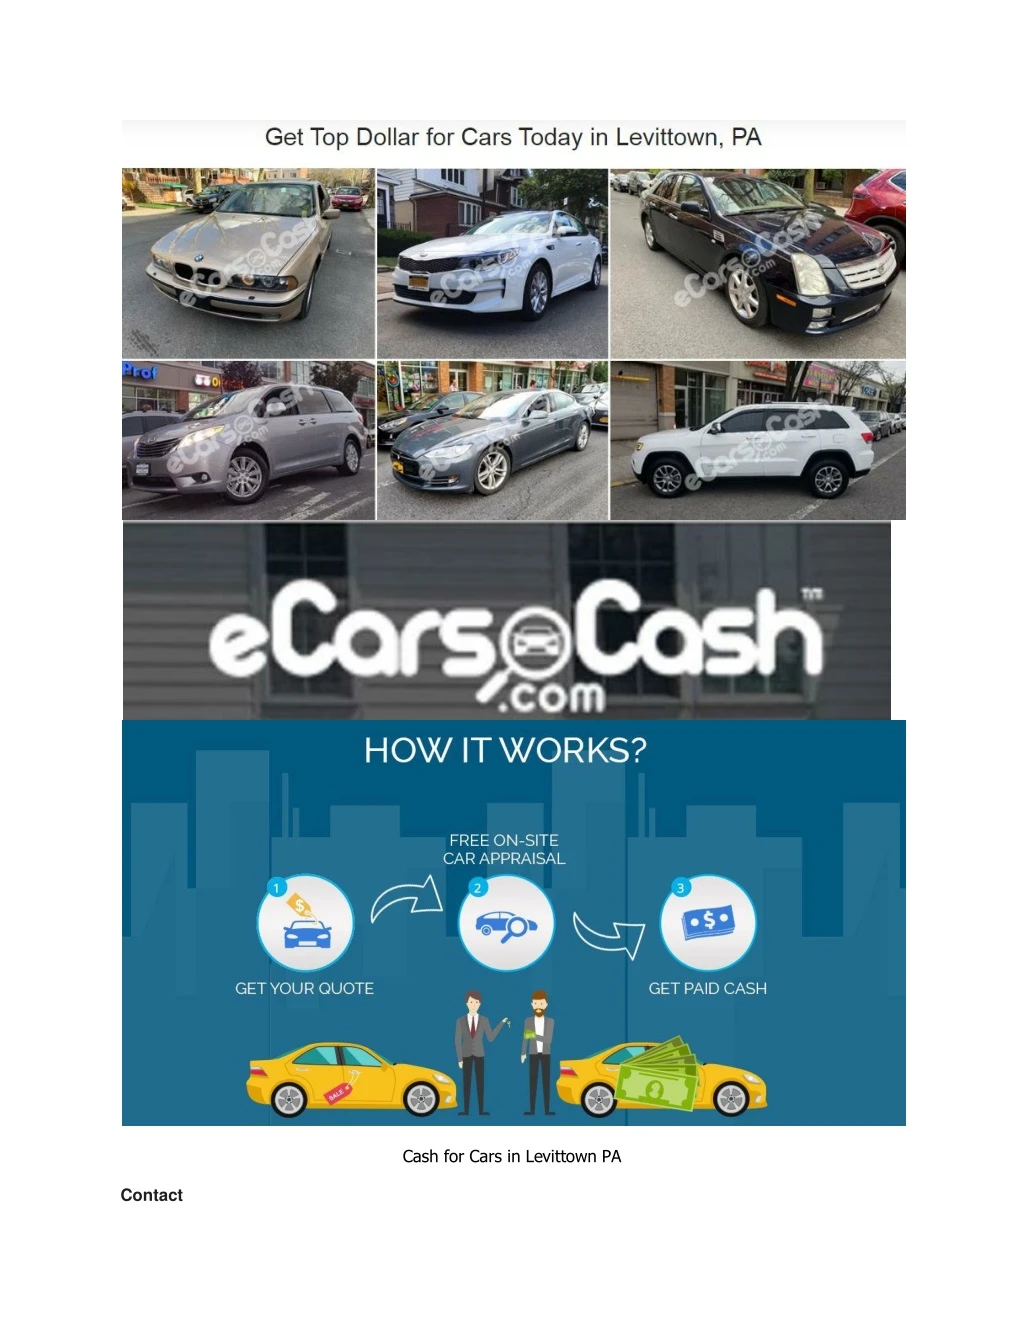 cash for cars in levittown pa